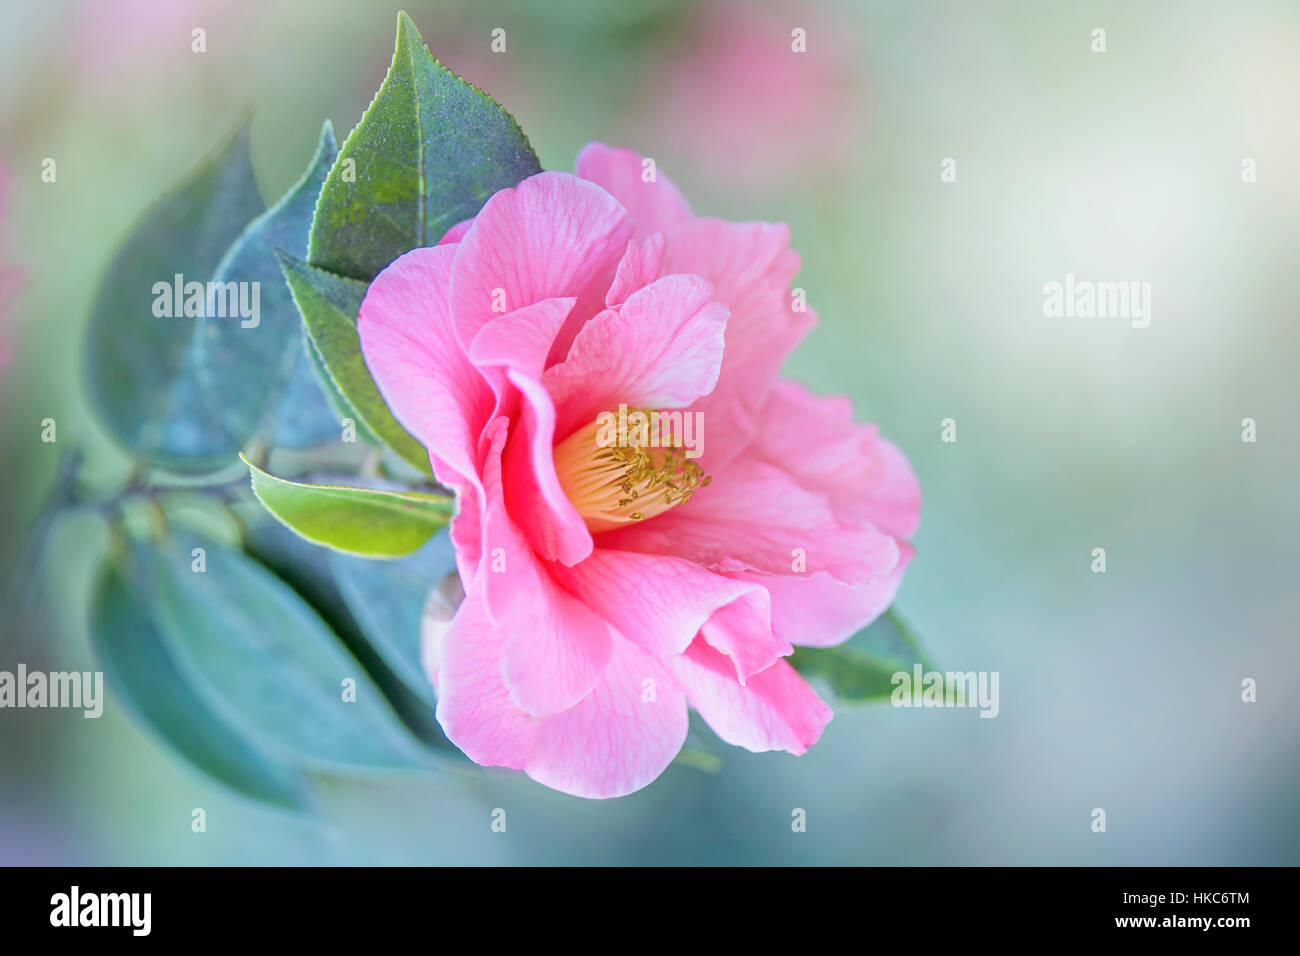 Close-up of a beautiful spring flowering pink Camellia flower against a soft background. Stock Photo